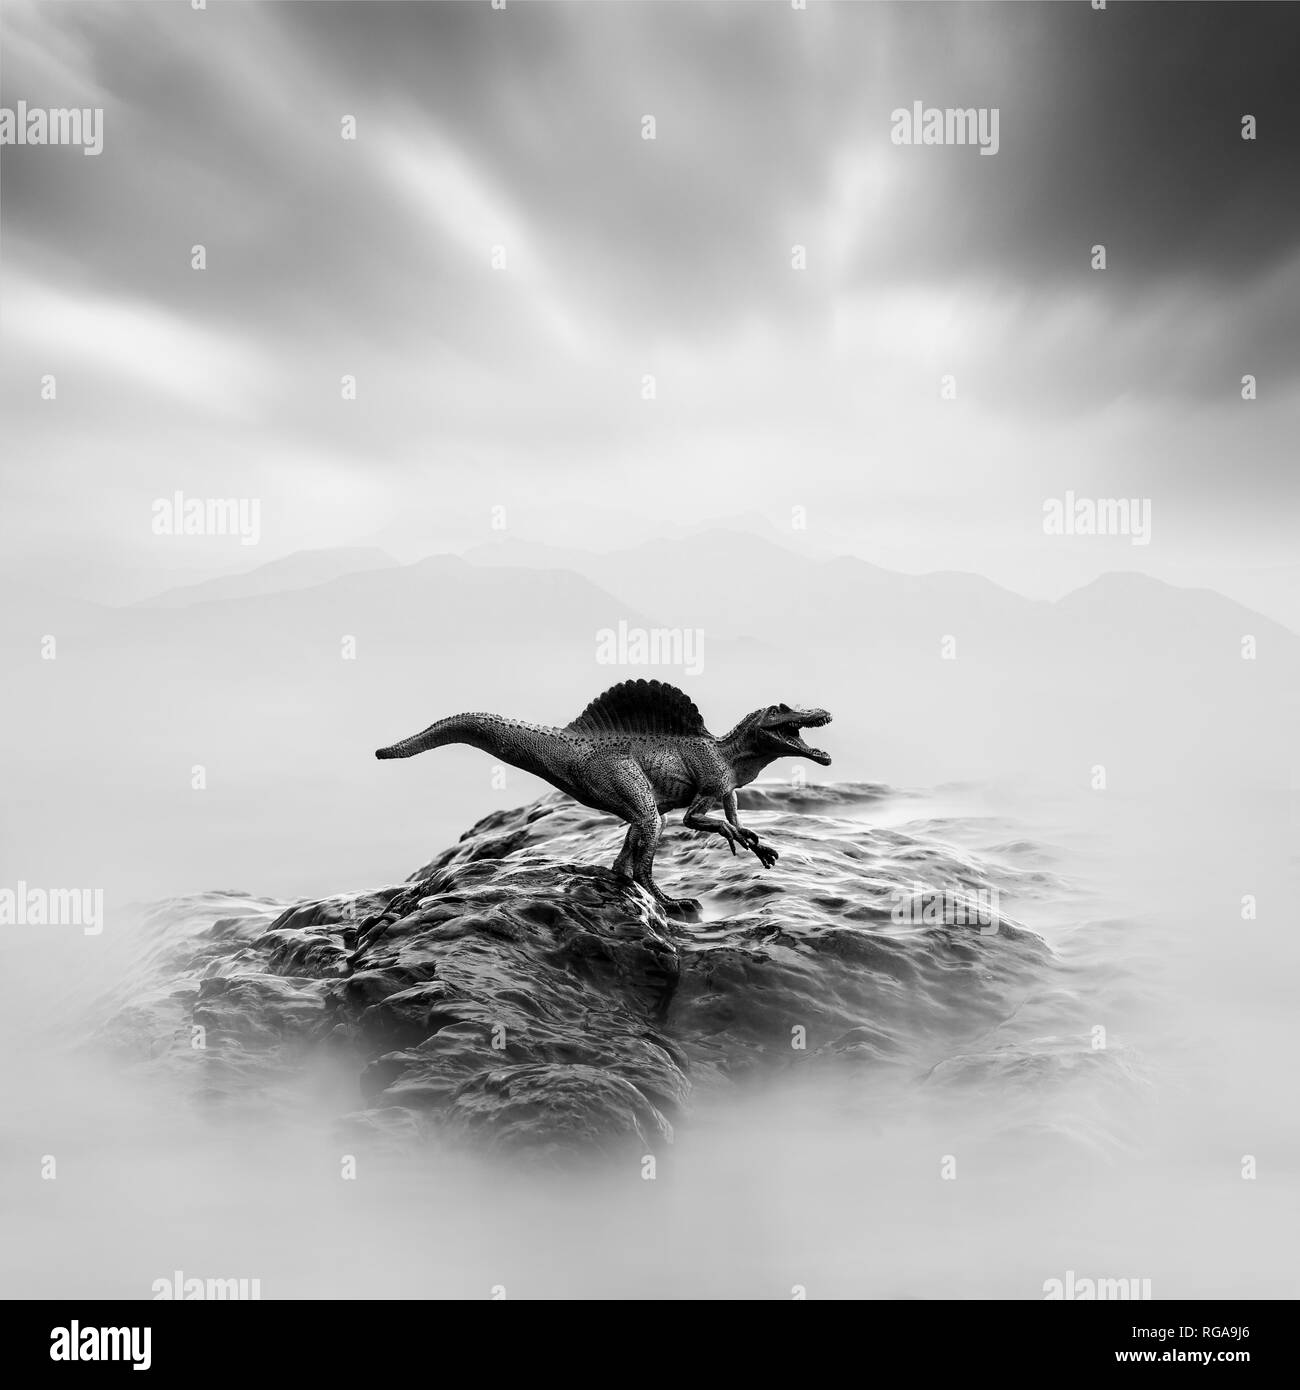 A toy dinosaur on a stone, black and white, long exposure Stock Photo